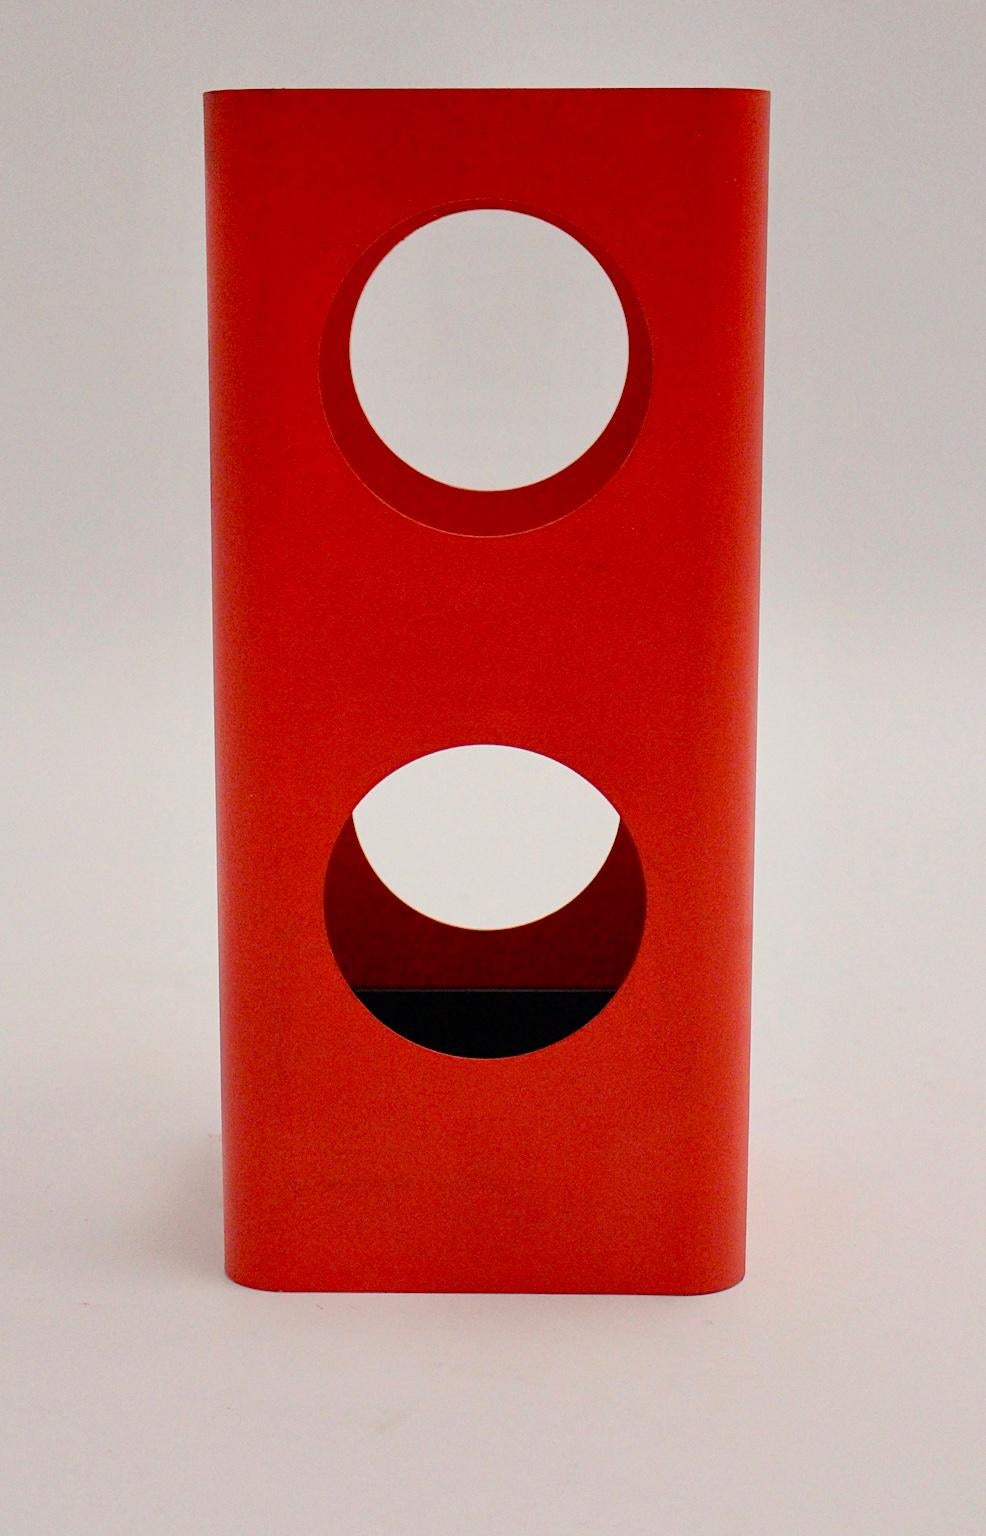 This space age red metal vintage umbrella stand was designed and made circa 1970 in Austria.
The umbrella stand features round holes as decoration and is newly red lacquered.
Furthermore the red umbrella stand has a loose black plastic drip